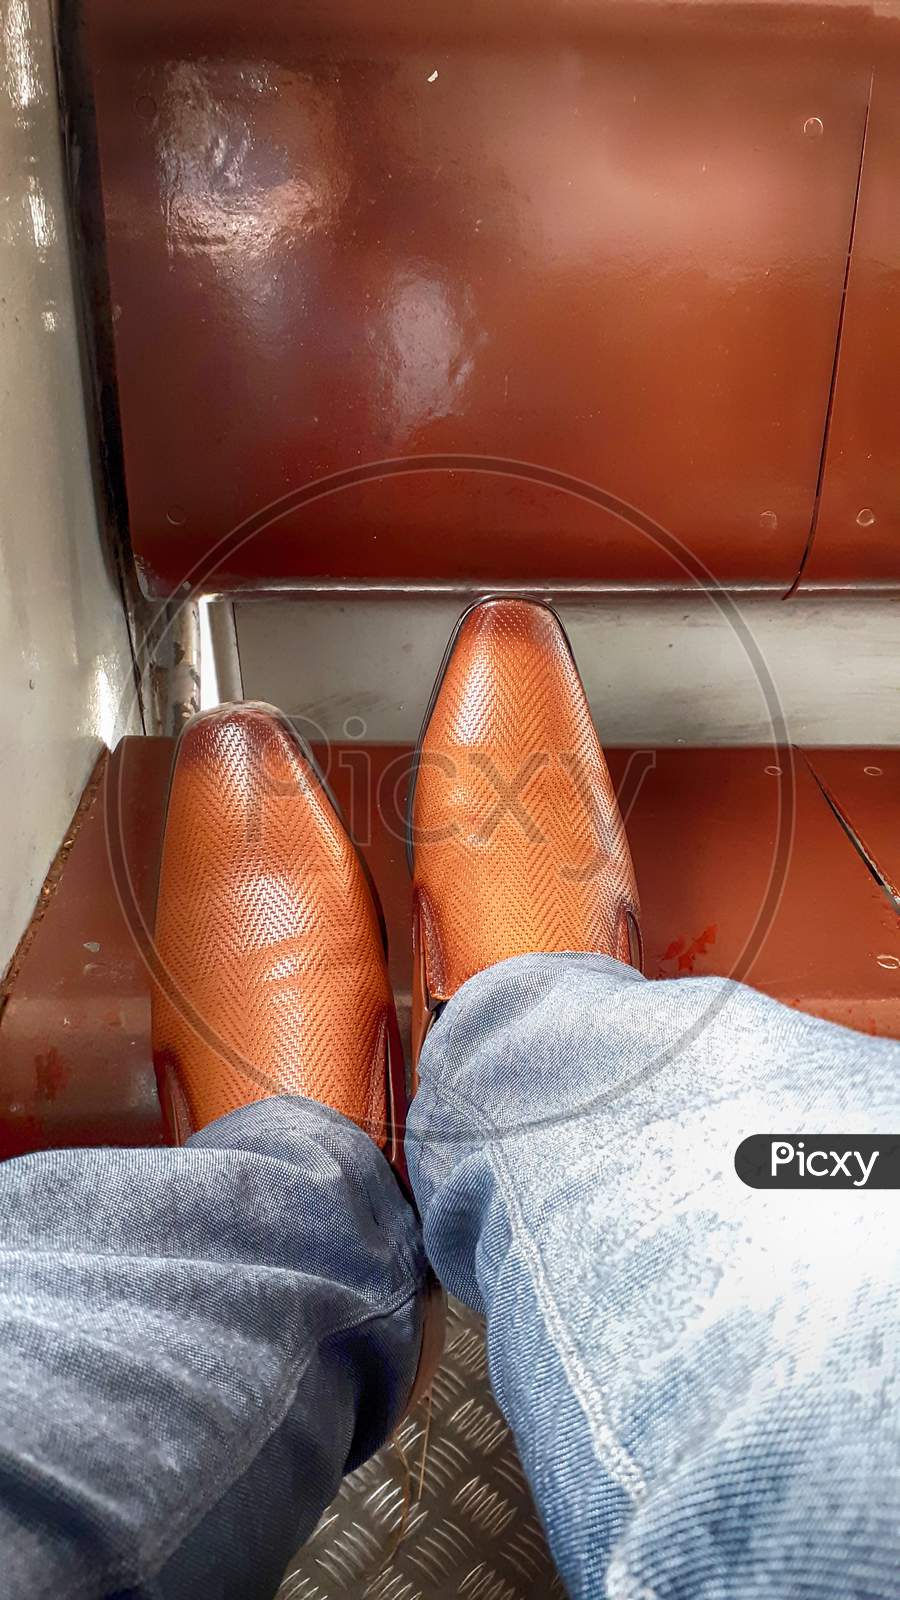 This Is A Picture Of A Man Wearing A Pair Of Brown Shoes.